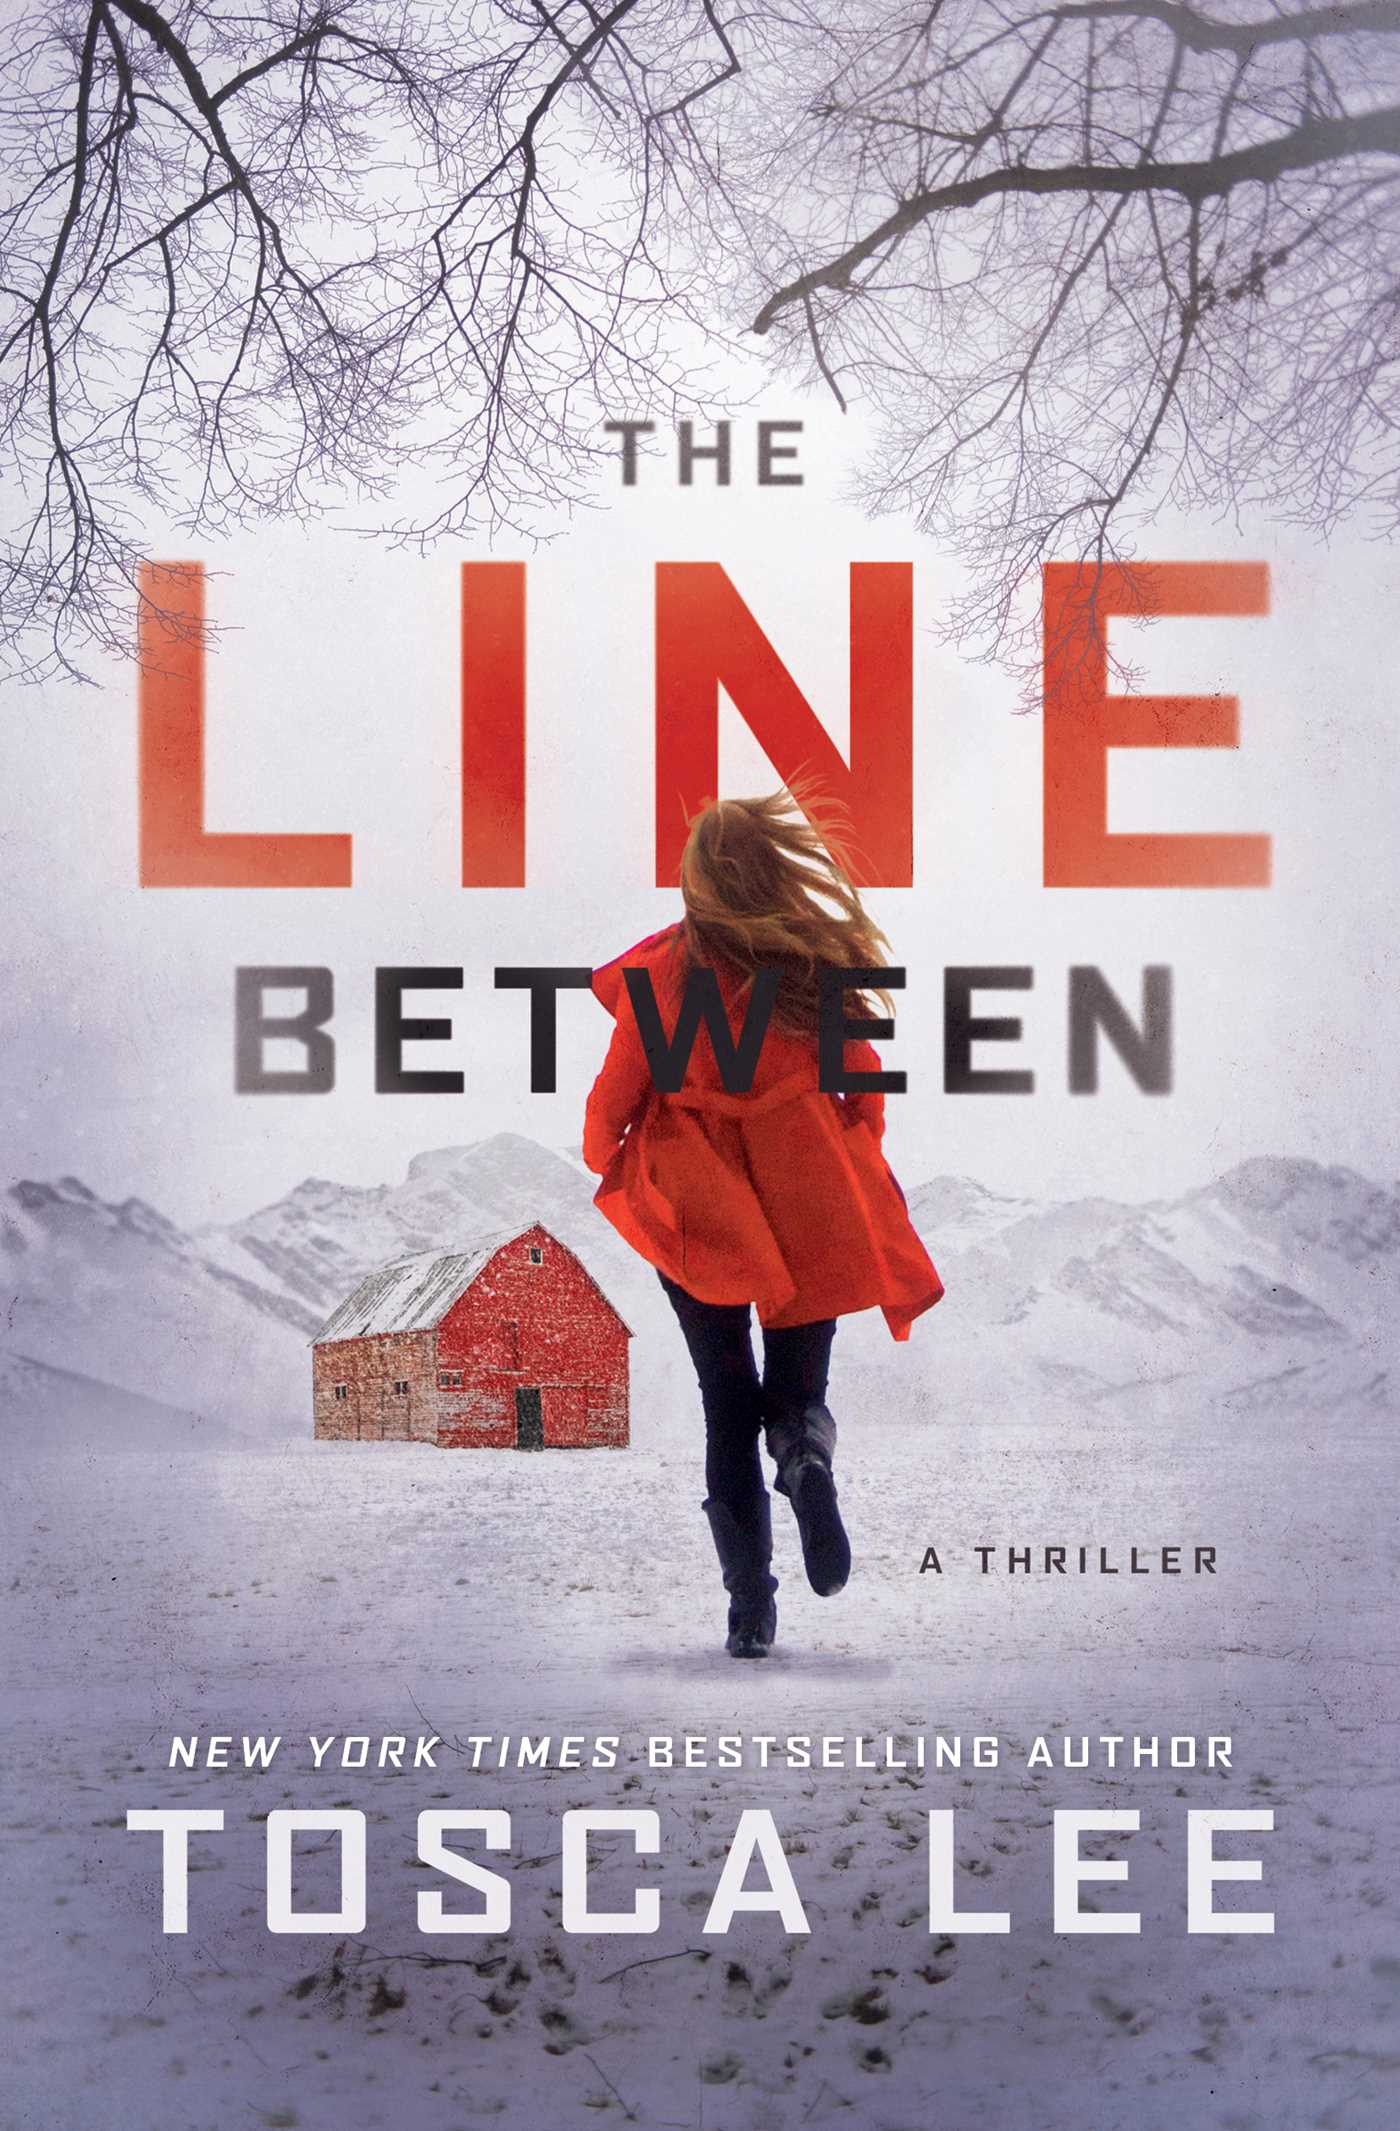 The Cover of the novel The Line Between